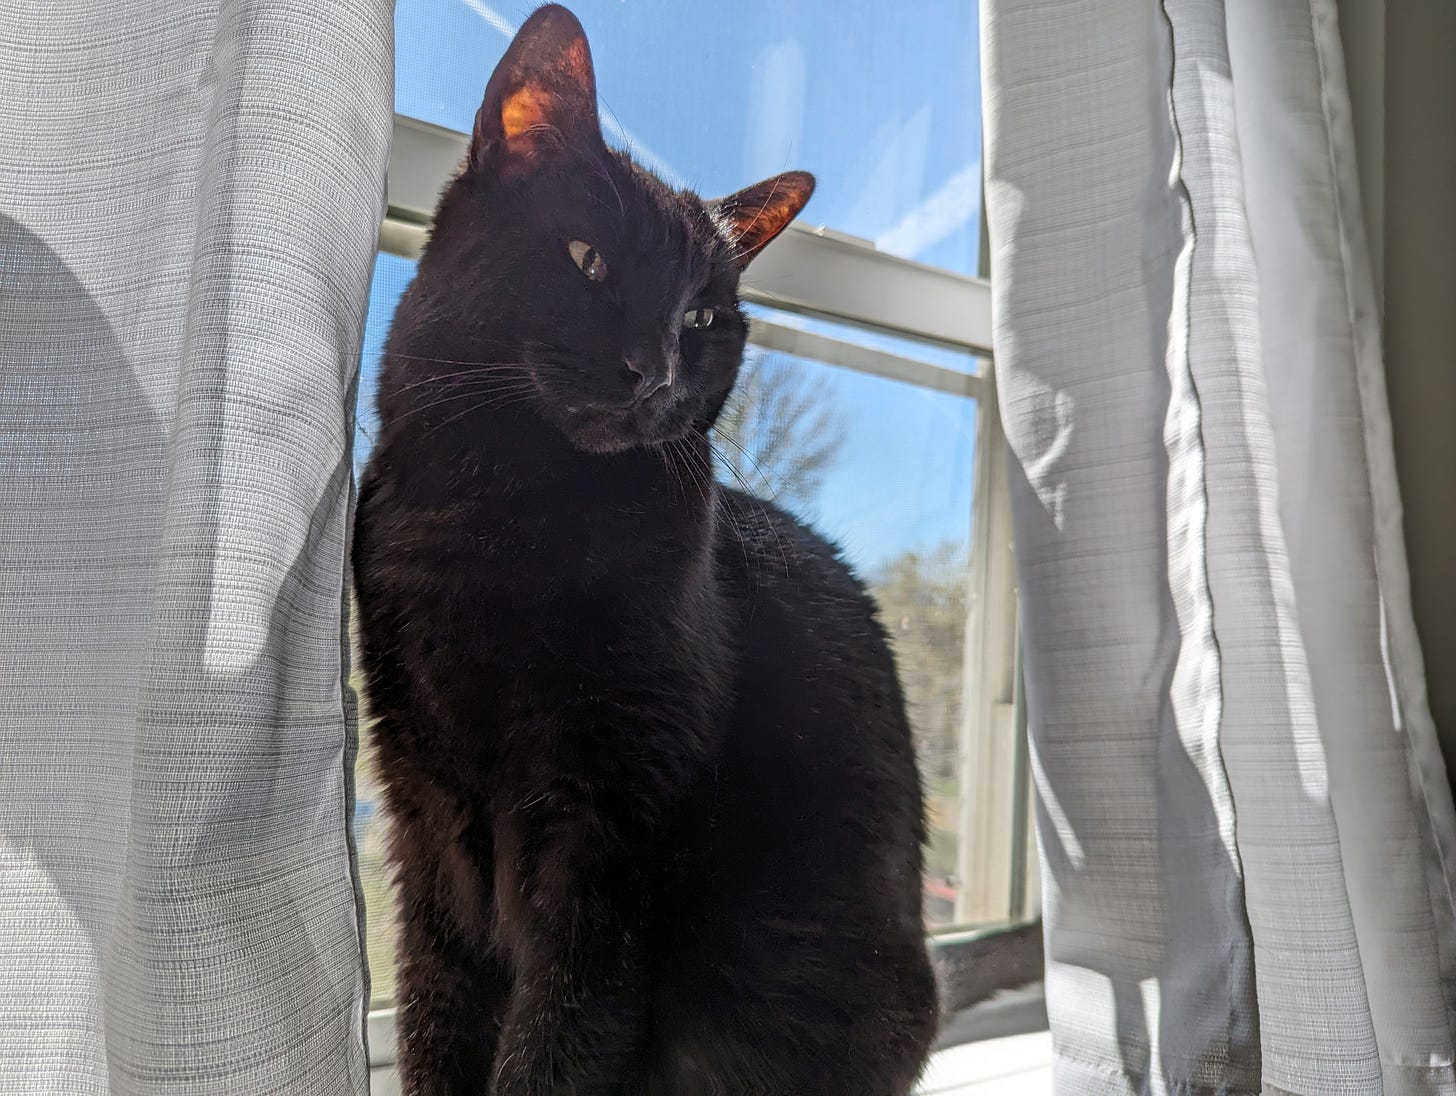 A black cat sits on a windowsill, looking inward against a blue sky and white curtains.